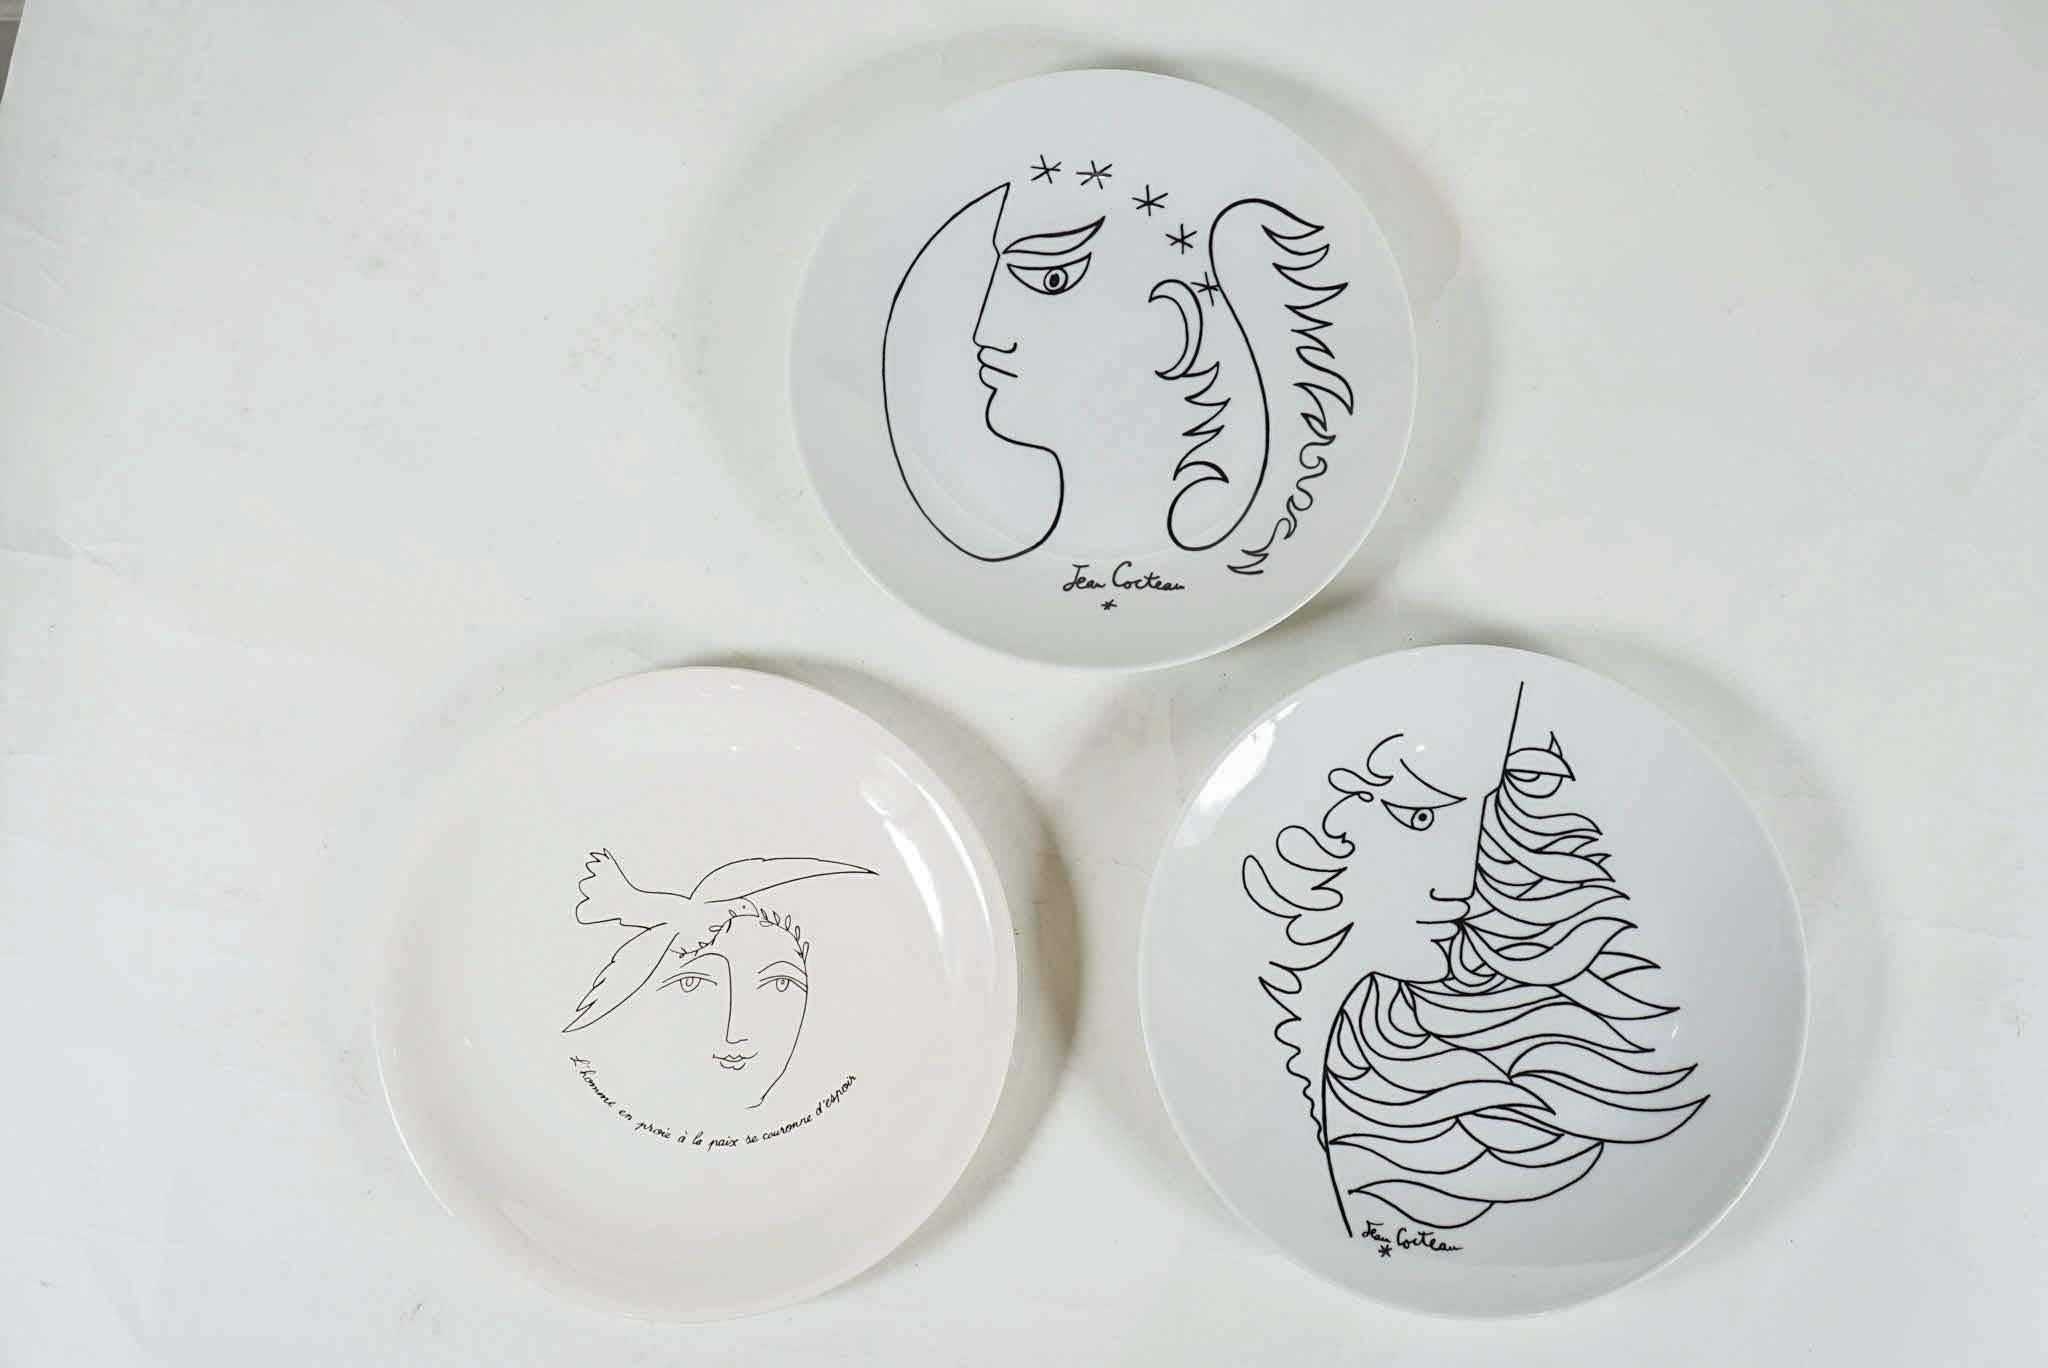 Here is a pair of gorgeous Jean Cocteau contour face plates by Promo Ceram made in France. The Picasso plate is by ECPLP. The plates are available as singles for $300 each.